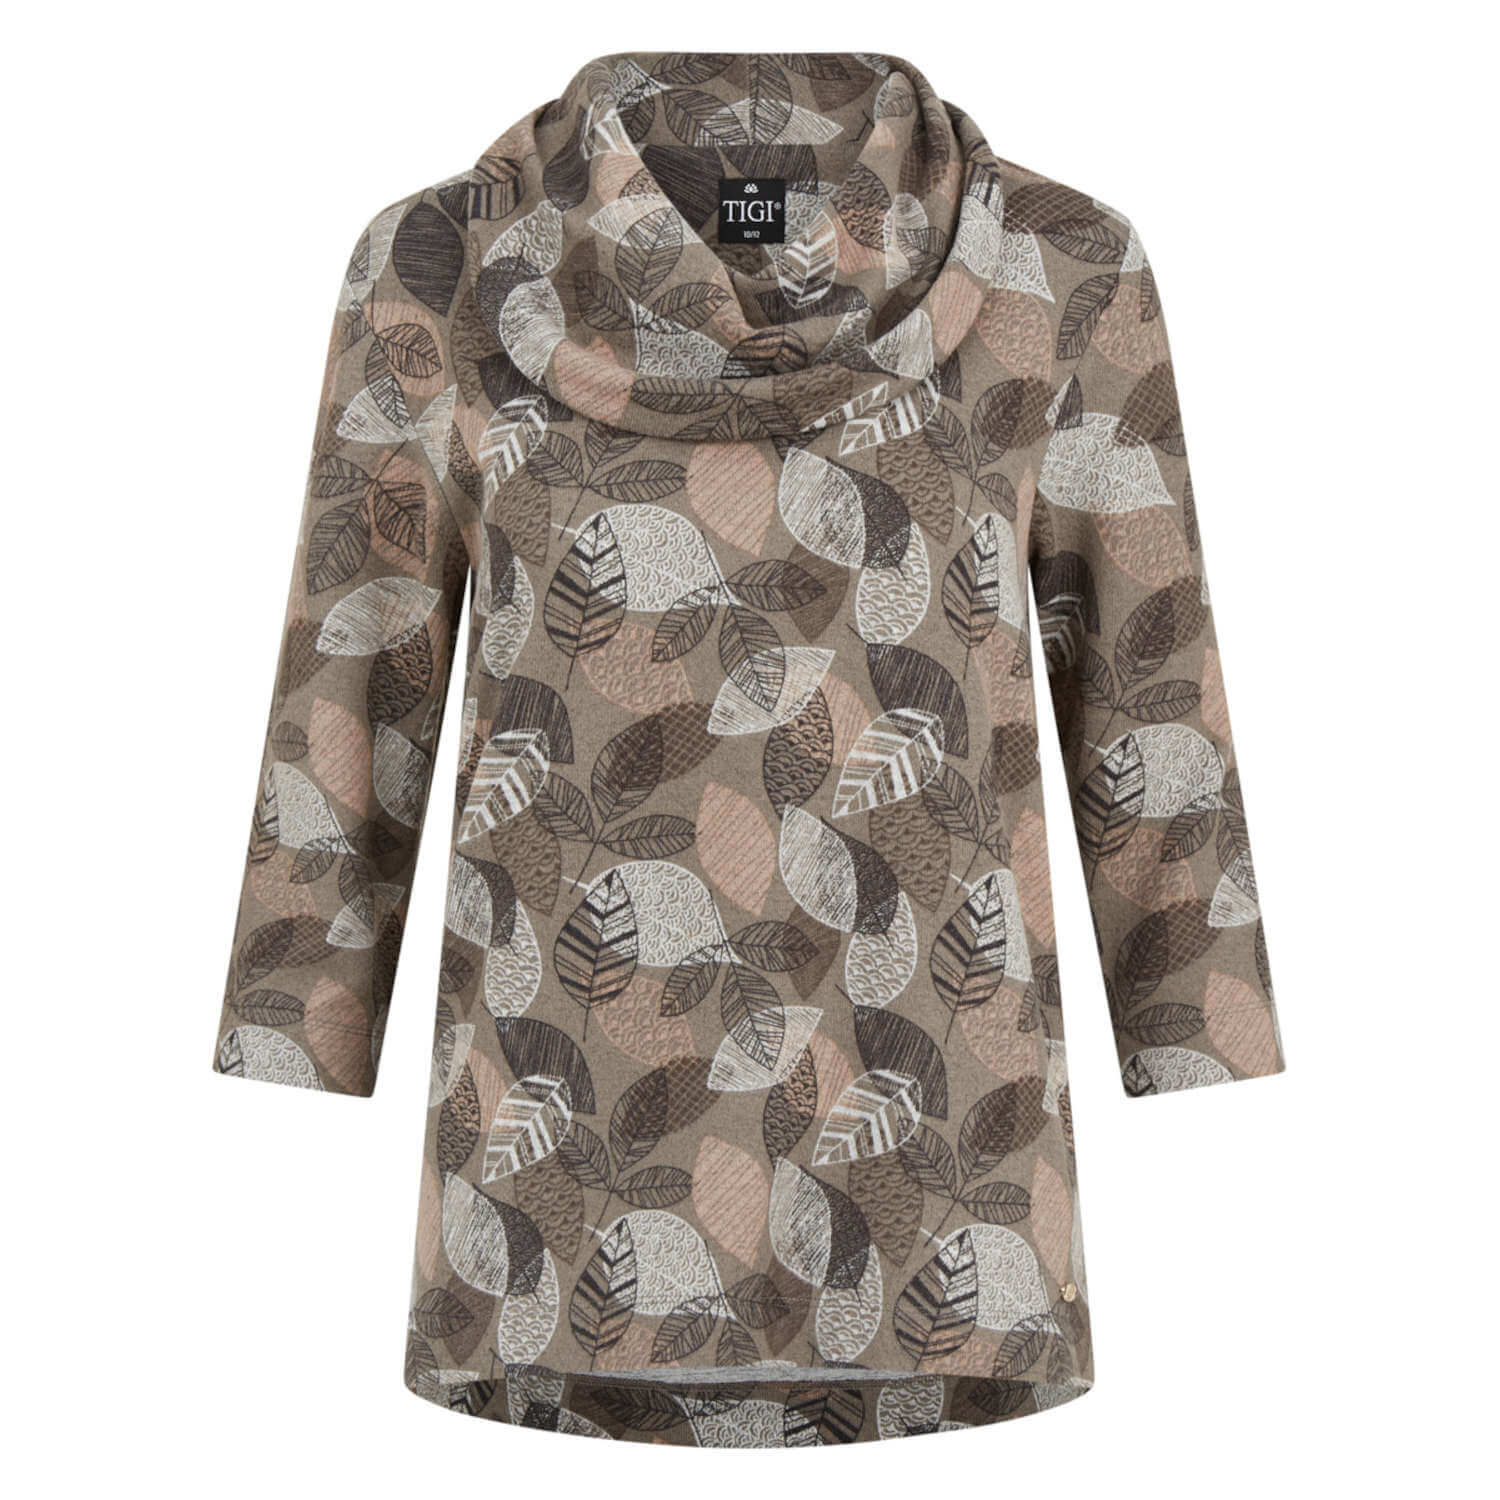 Tigiwear Leaf Print Cowl Neck Top- Taupe 6 Shaws Department Stores